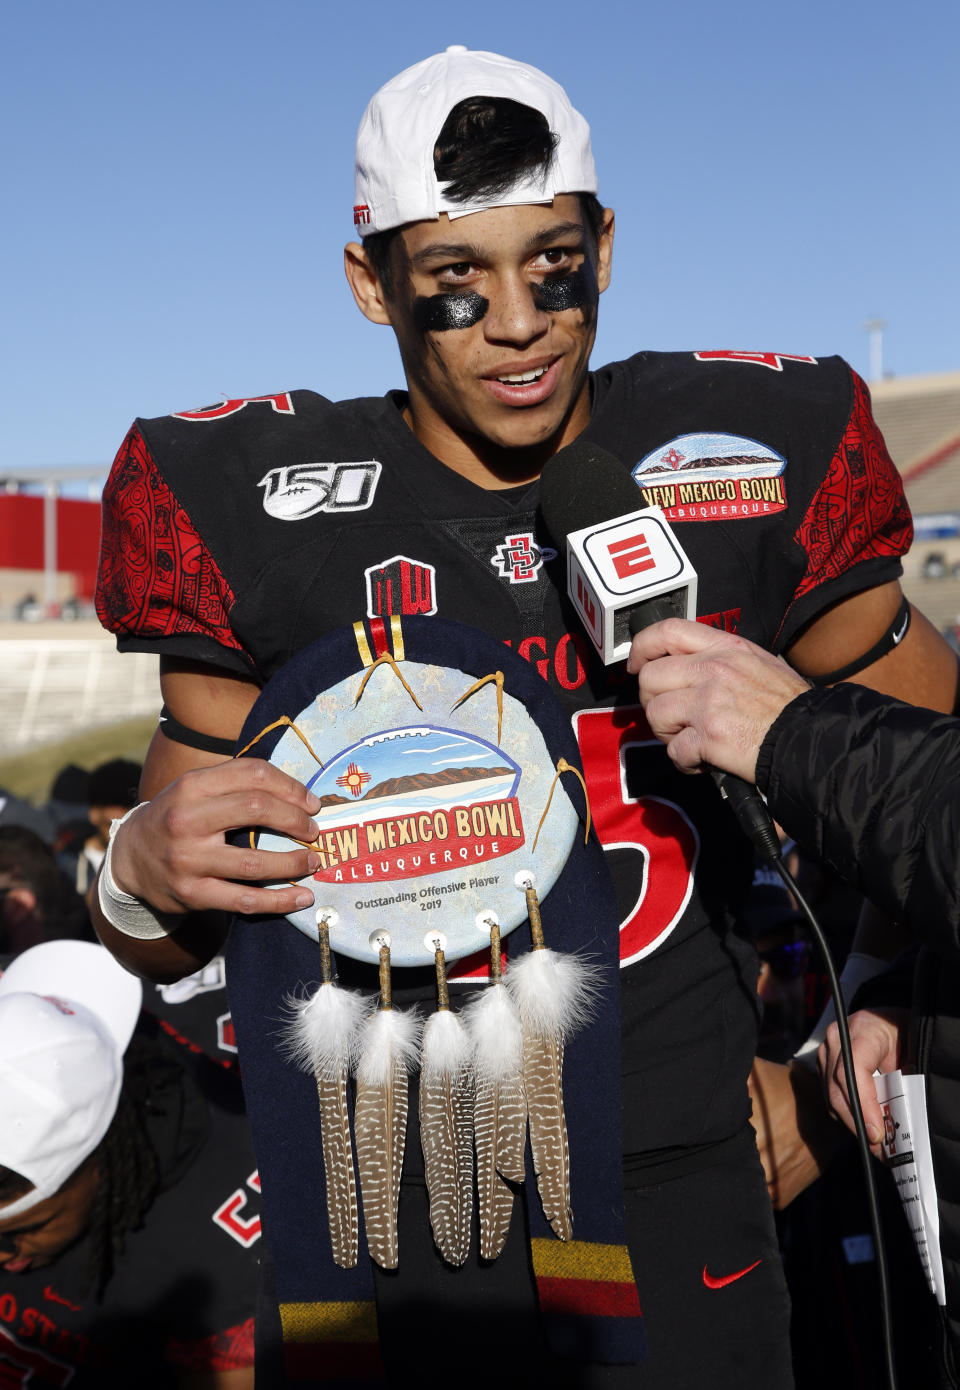 San Diego State wide receiver Jesse Matthews, one of the two recipients of the offensive MVP award, speaks during the presentation of the New Mexico Bowl NCAA college football game on Saturday, Dec. 21, 2019 in Albuquerque, N.M. San Diego State beat Central Michigan 48-11. (AP Photo/Andres Leighton)